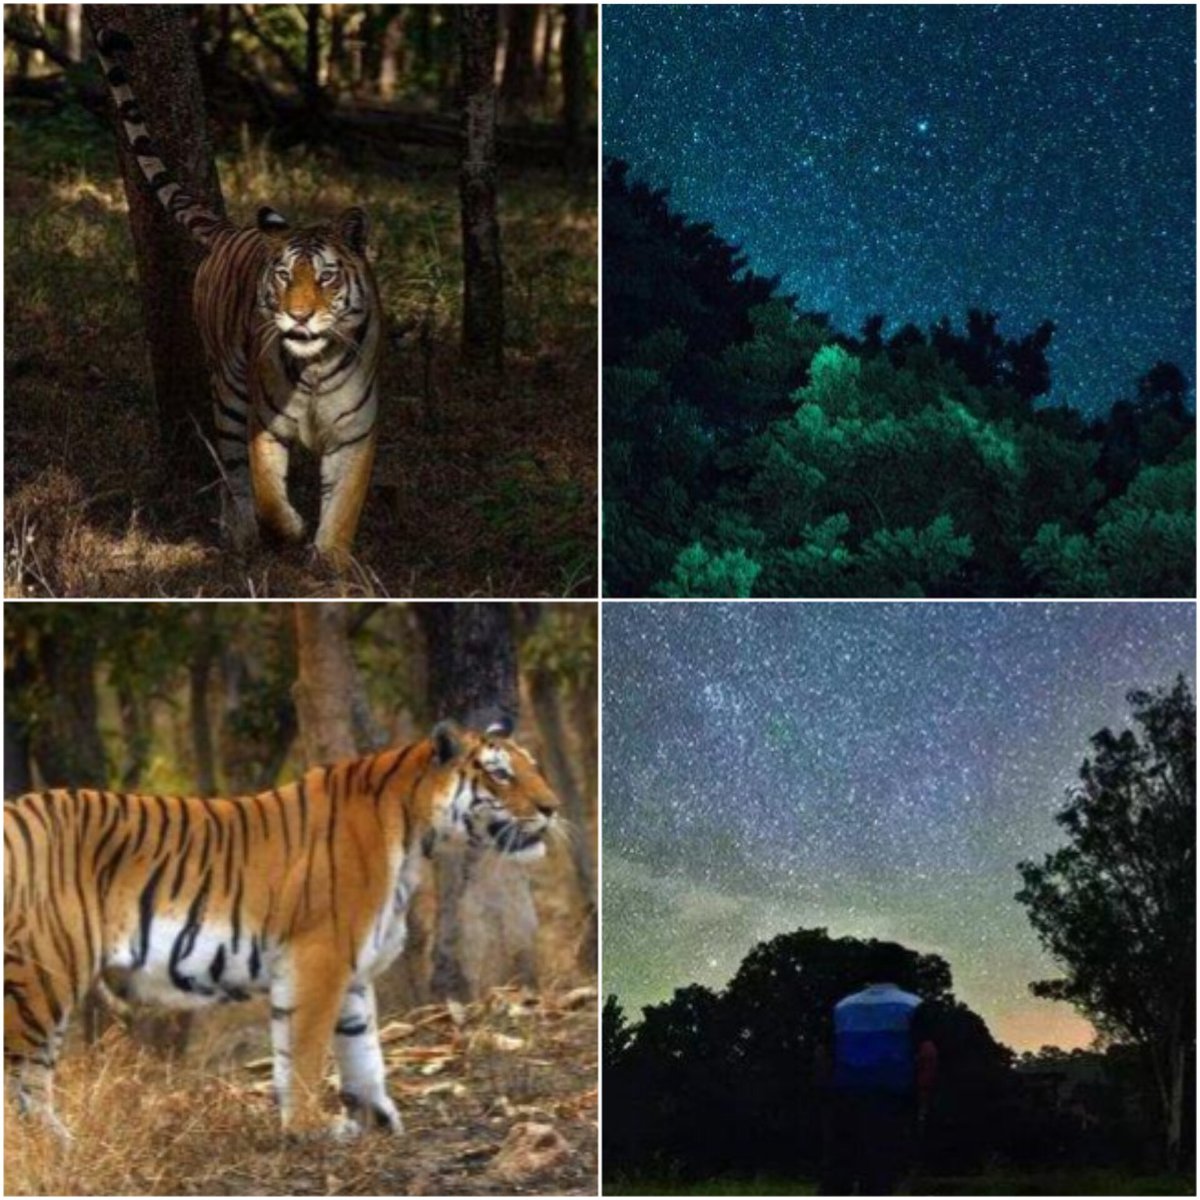 Pench Tiger Reserve named #India's first Dark Sky Park, tackling light pollution with practical measures. Commits to balance conservation and community well-being.

Read more on shorts91.com/category/india

#DarkSkyPark #PenchTigerReserve #LightPollution #TigerReserve